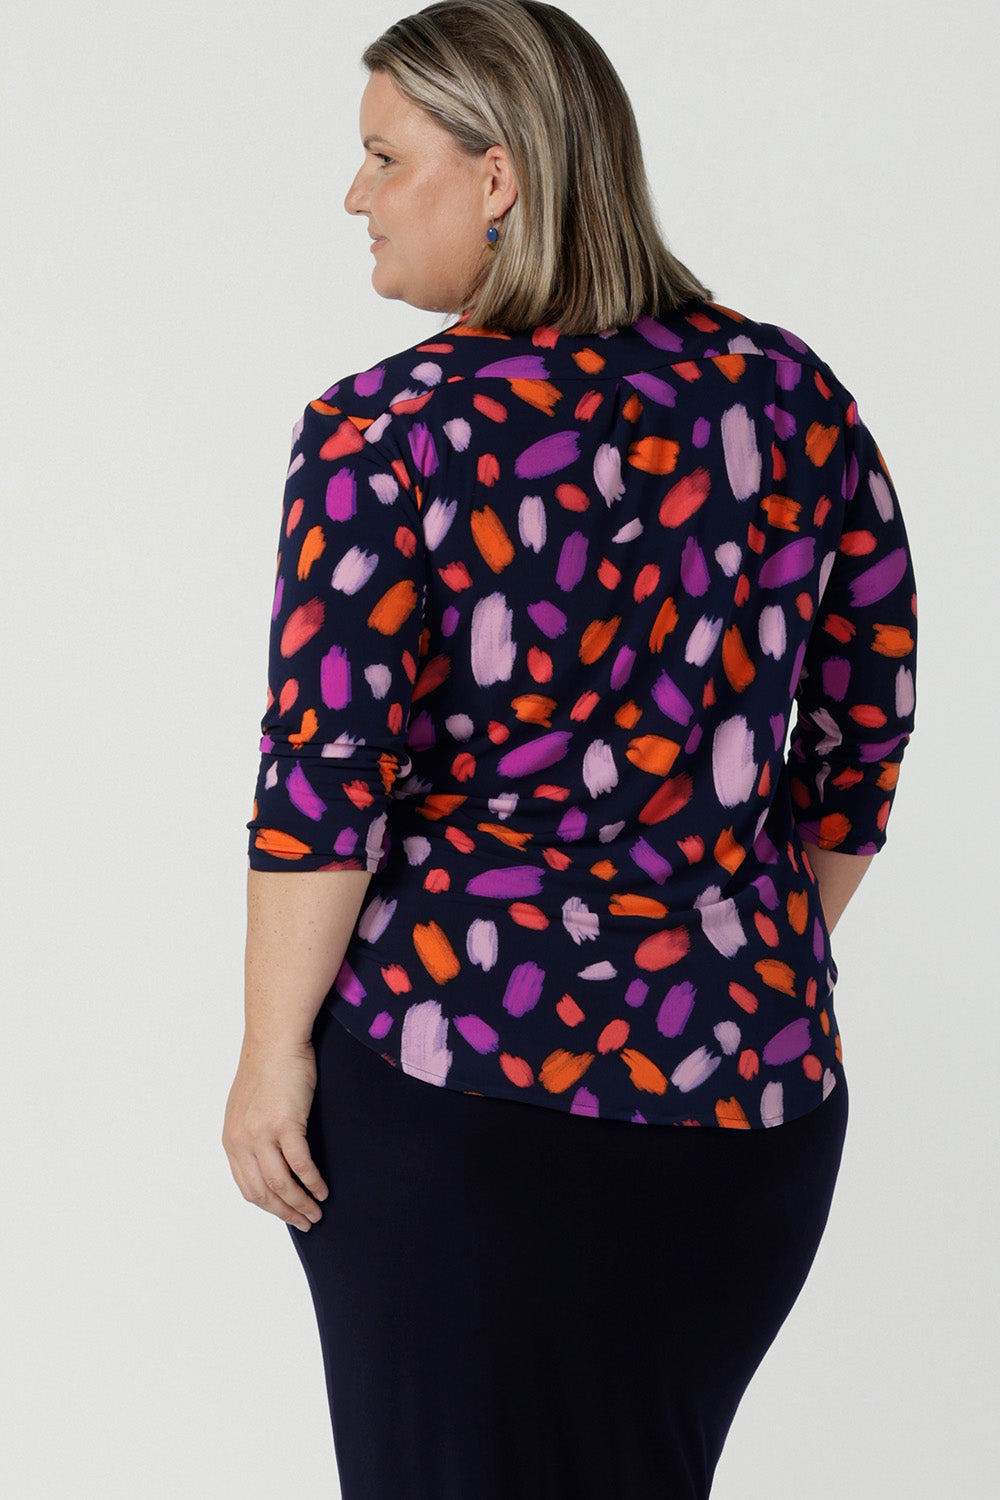 Back view of a size 18 curvy woman wears the Jaime top in Palette. A brush stroke inspired abstract print on a navy base with fuchsia, red, orange and pink spots. A v-neck pleat front top great for work to weekend. Comfortable jersey and easy care. Made in Australia for women size 8 - 24.